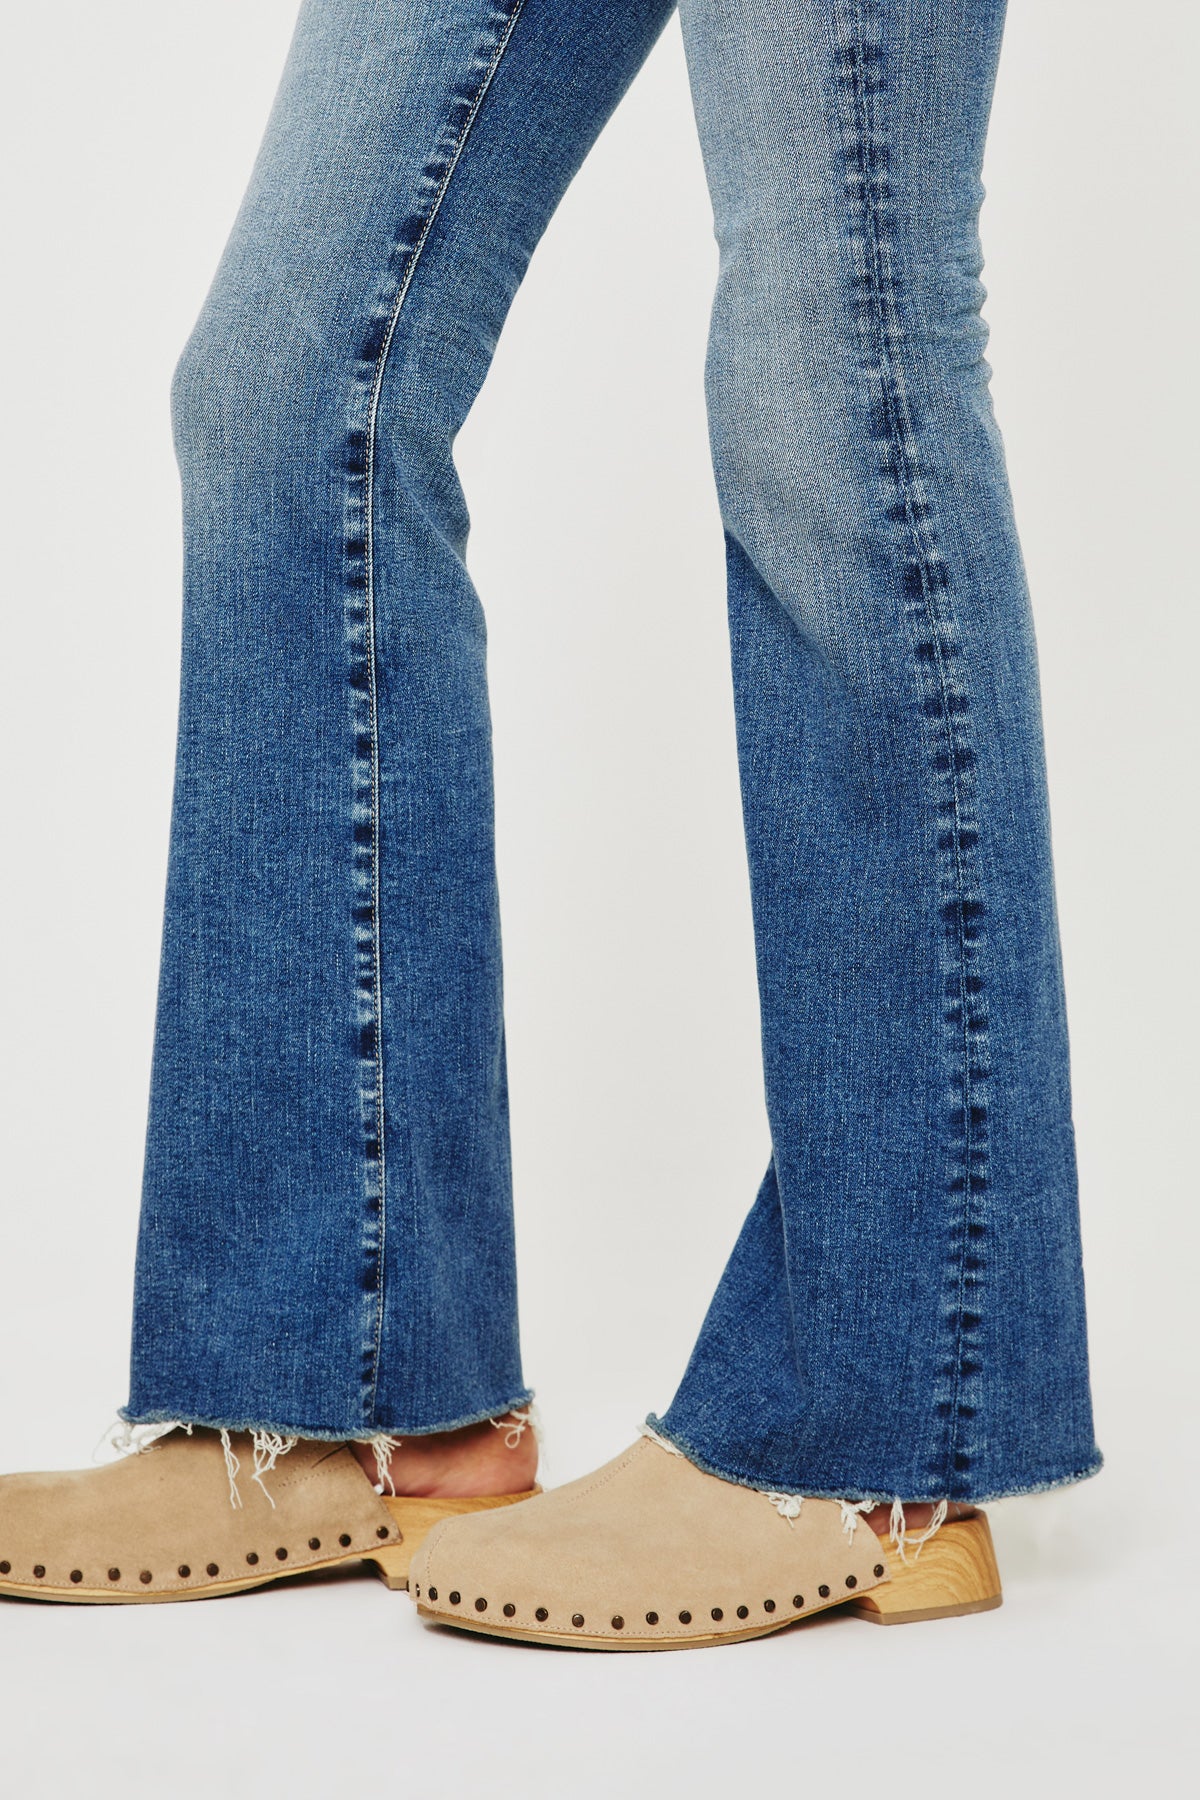 ag jeans farrah high rise boot cut jean in 14 years intentional blue, ankle view